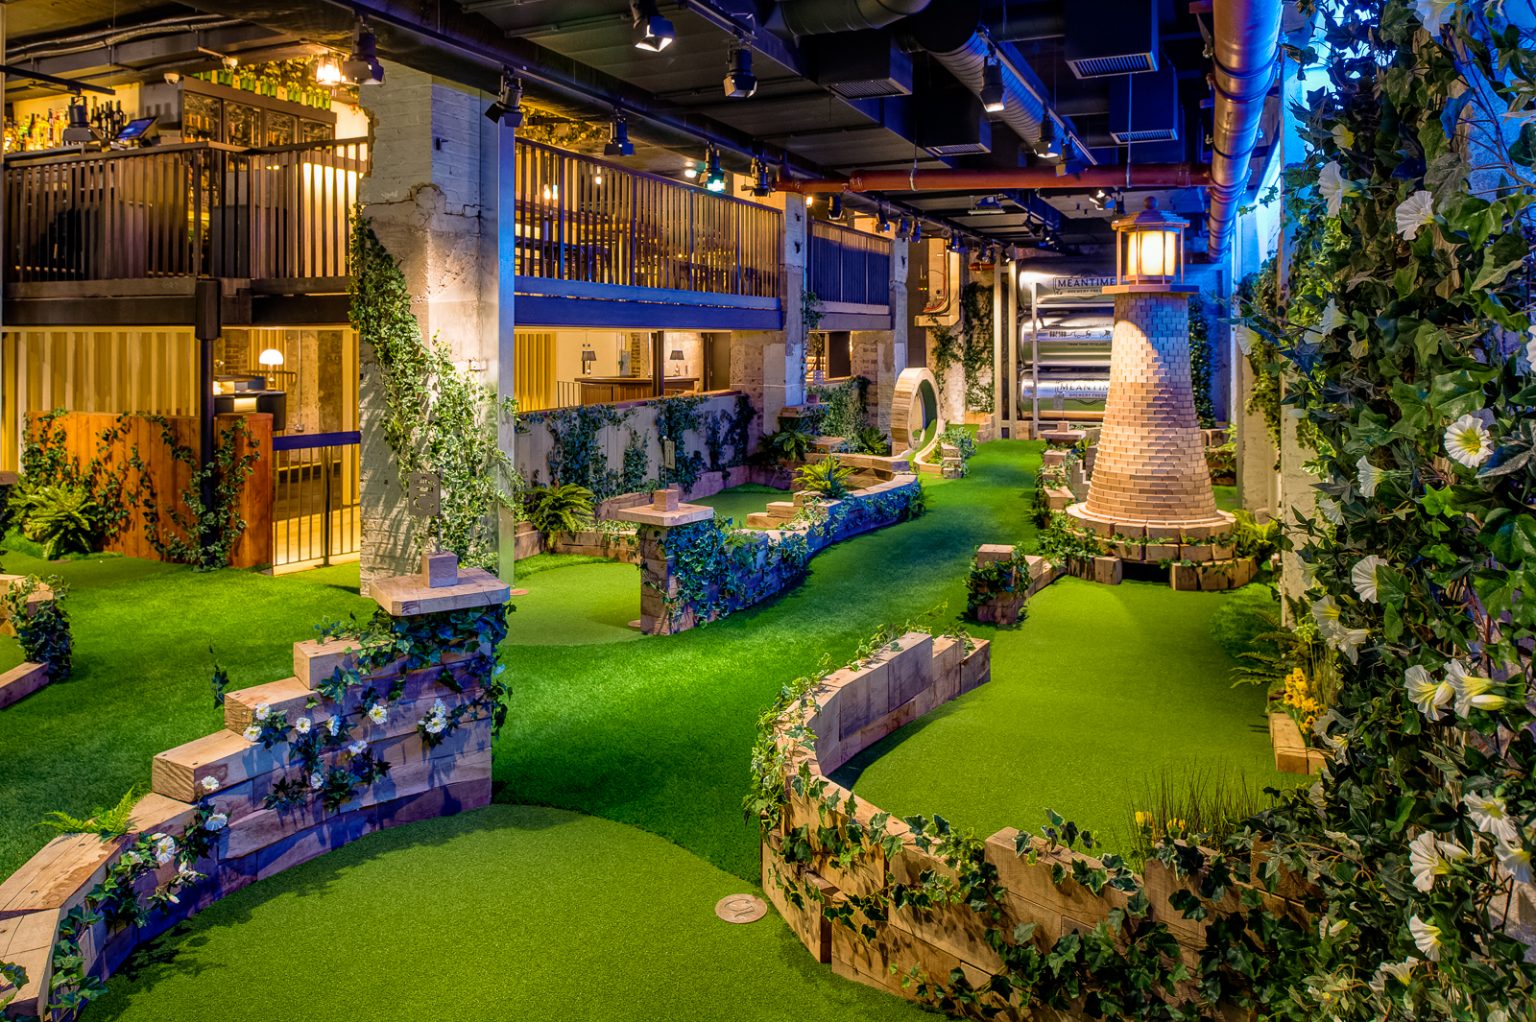 Swingers goes stateside Crazy golf club to open venues in US Cit photo